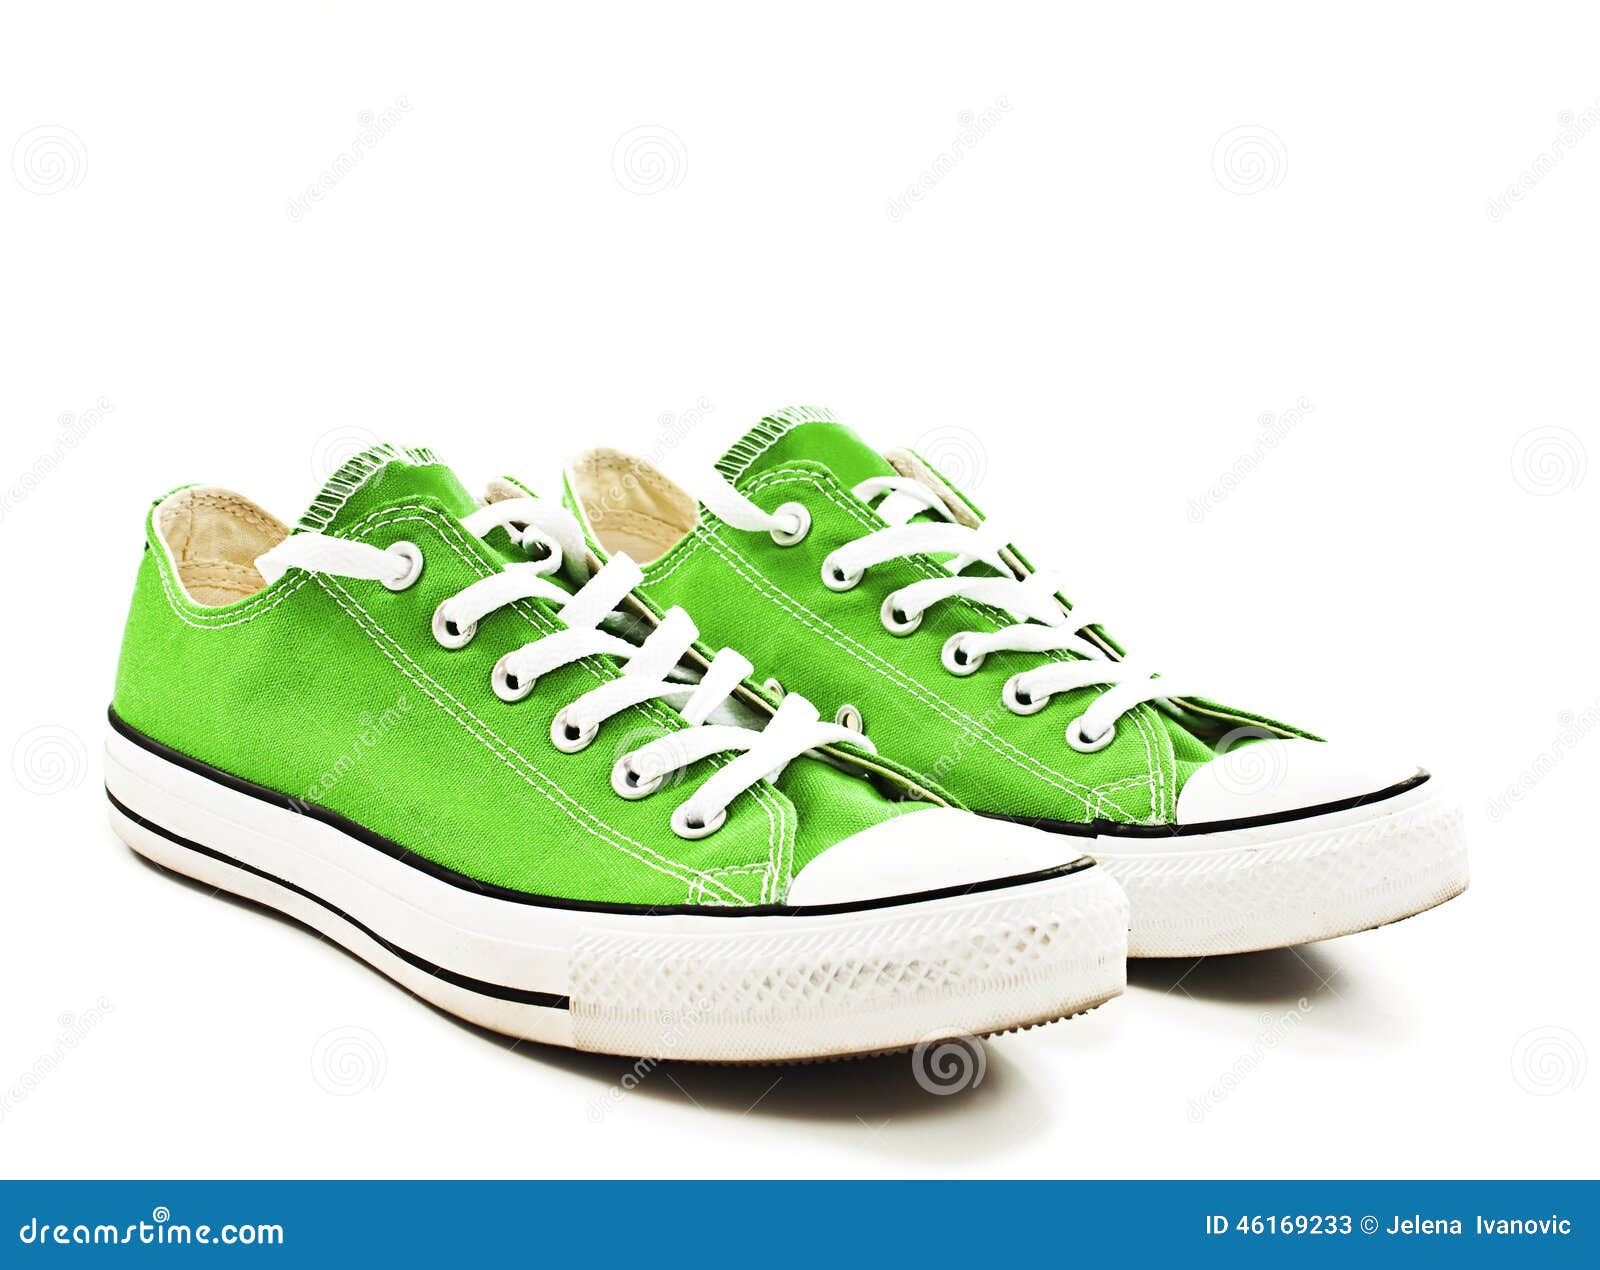 Vintage green shoes stock image. Image of dirt, basketball - 46169233